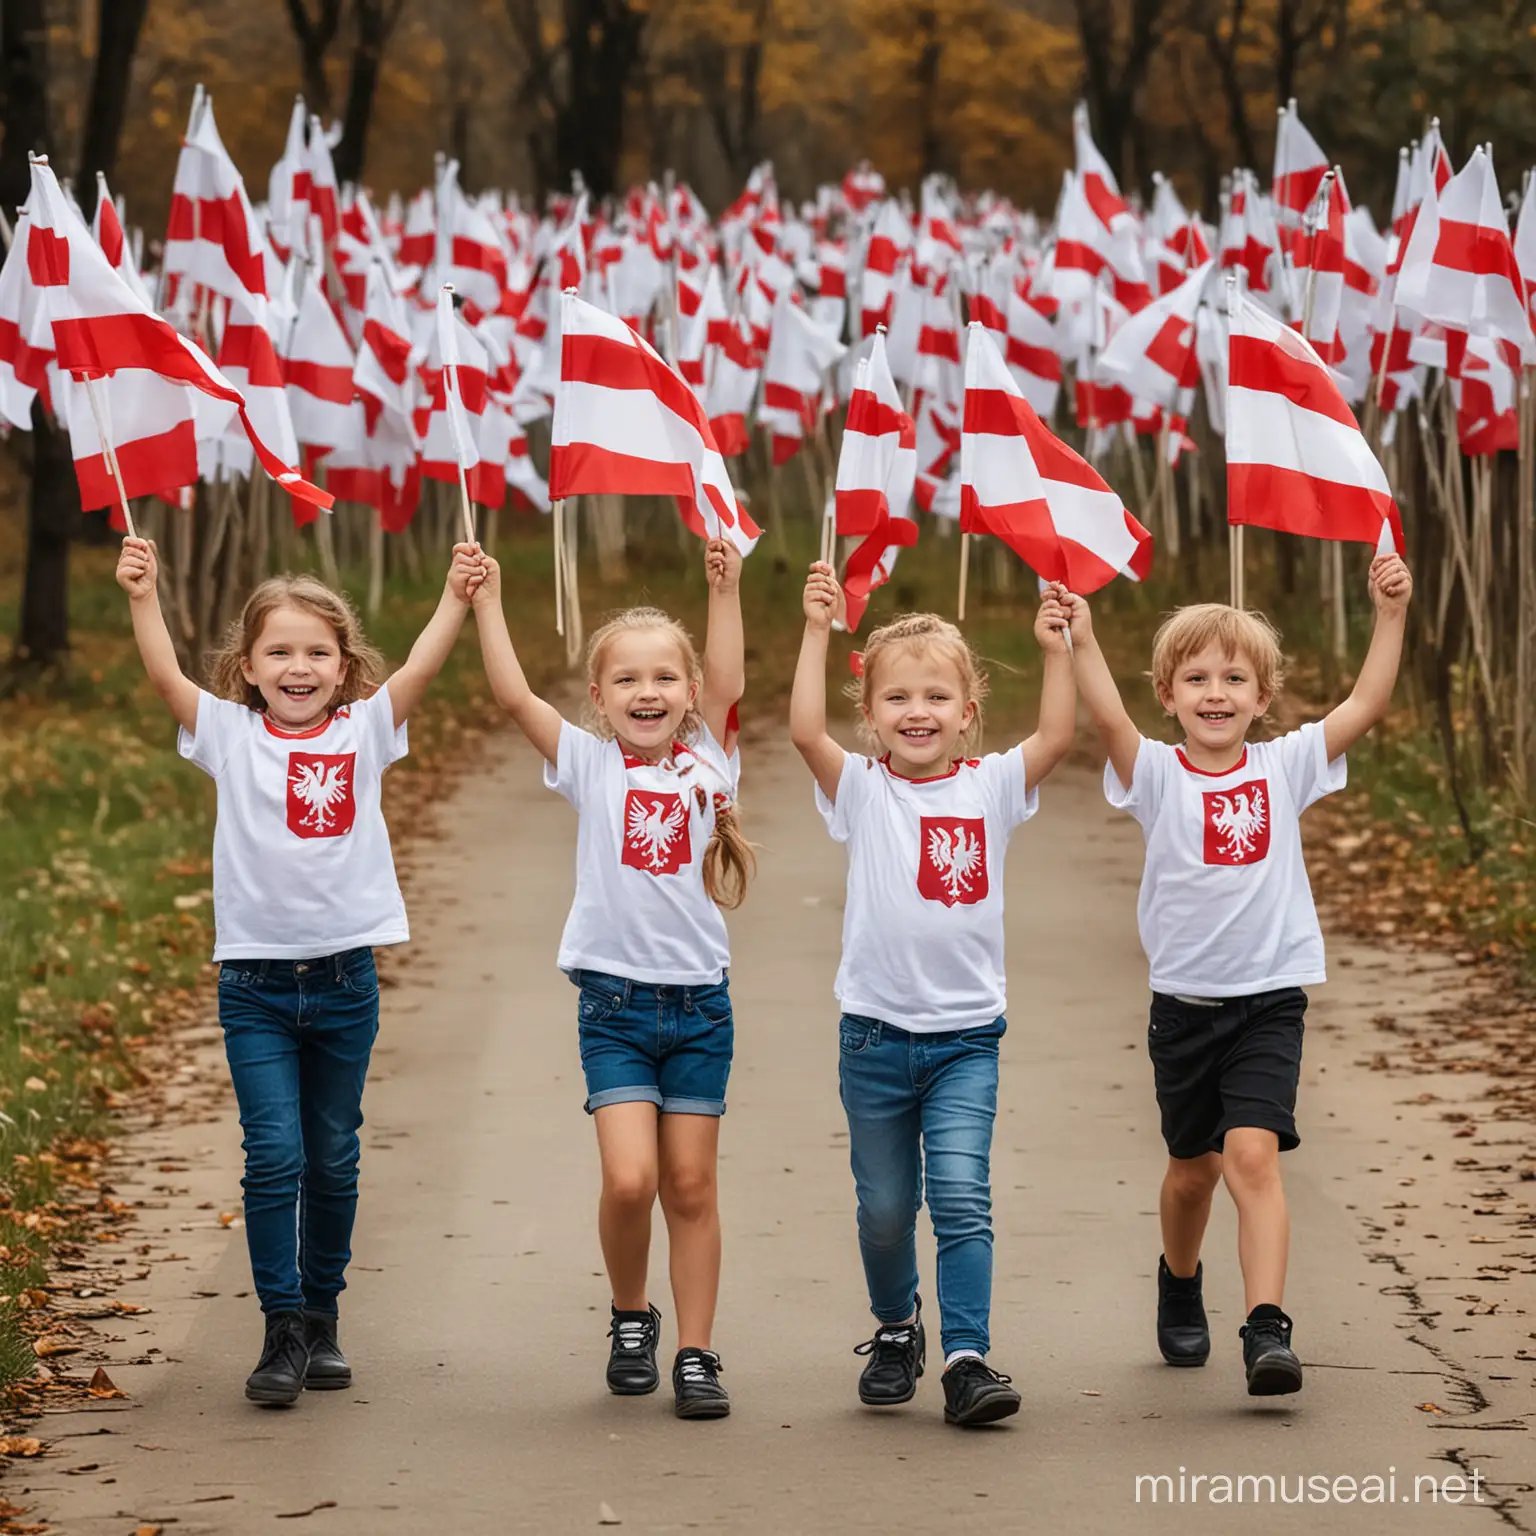 happy proud kids keeping hands up   carrying
little polish flags